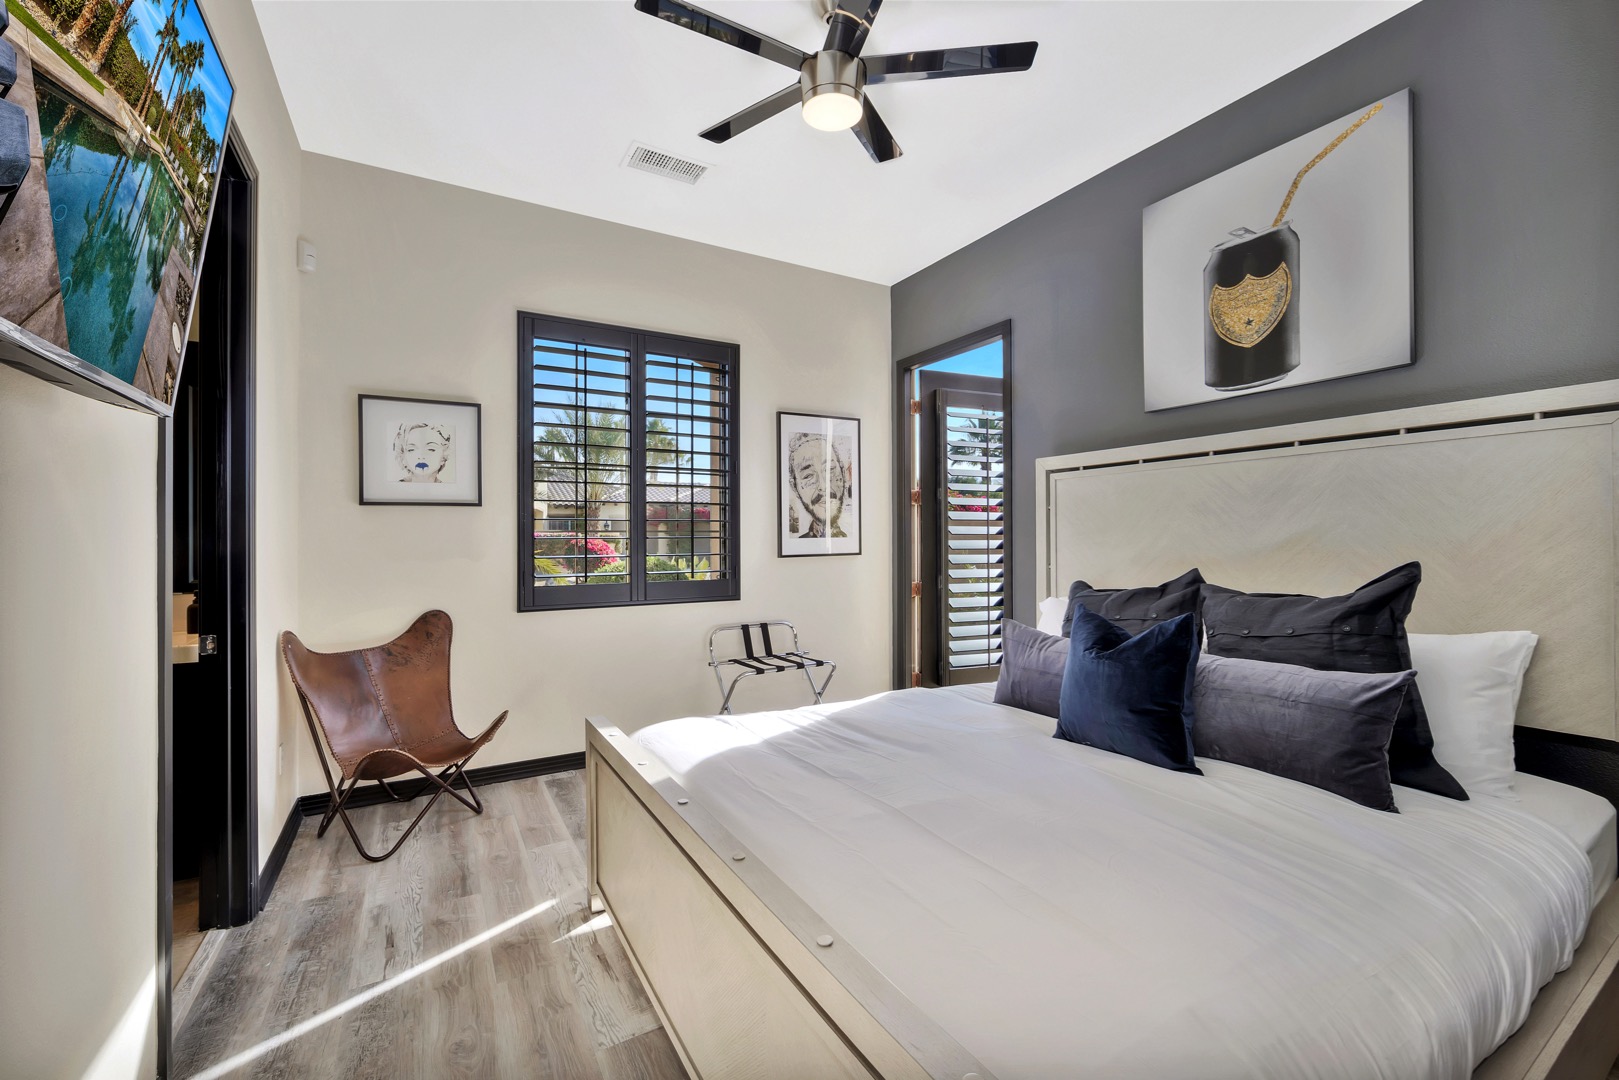 Bedroom 2 has a king size bed, access to the front courtyard and shares a Jack & Jill bathroom with bedroom #3!